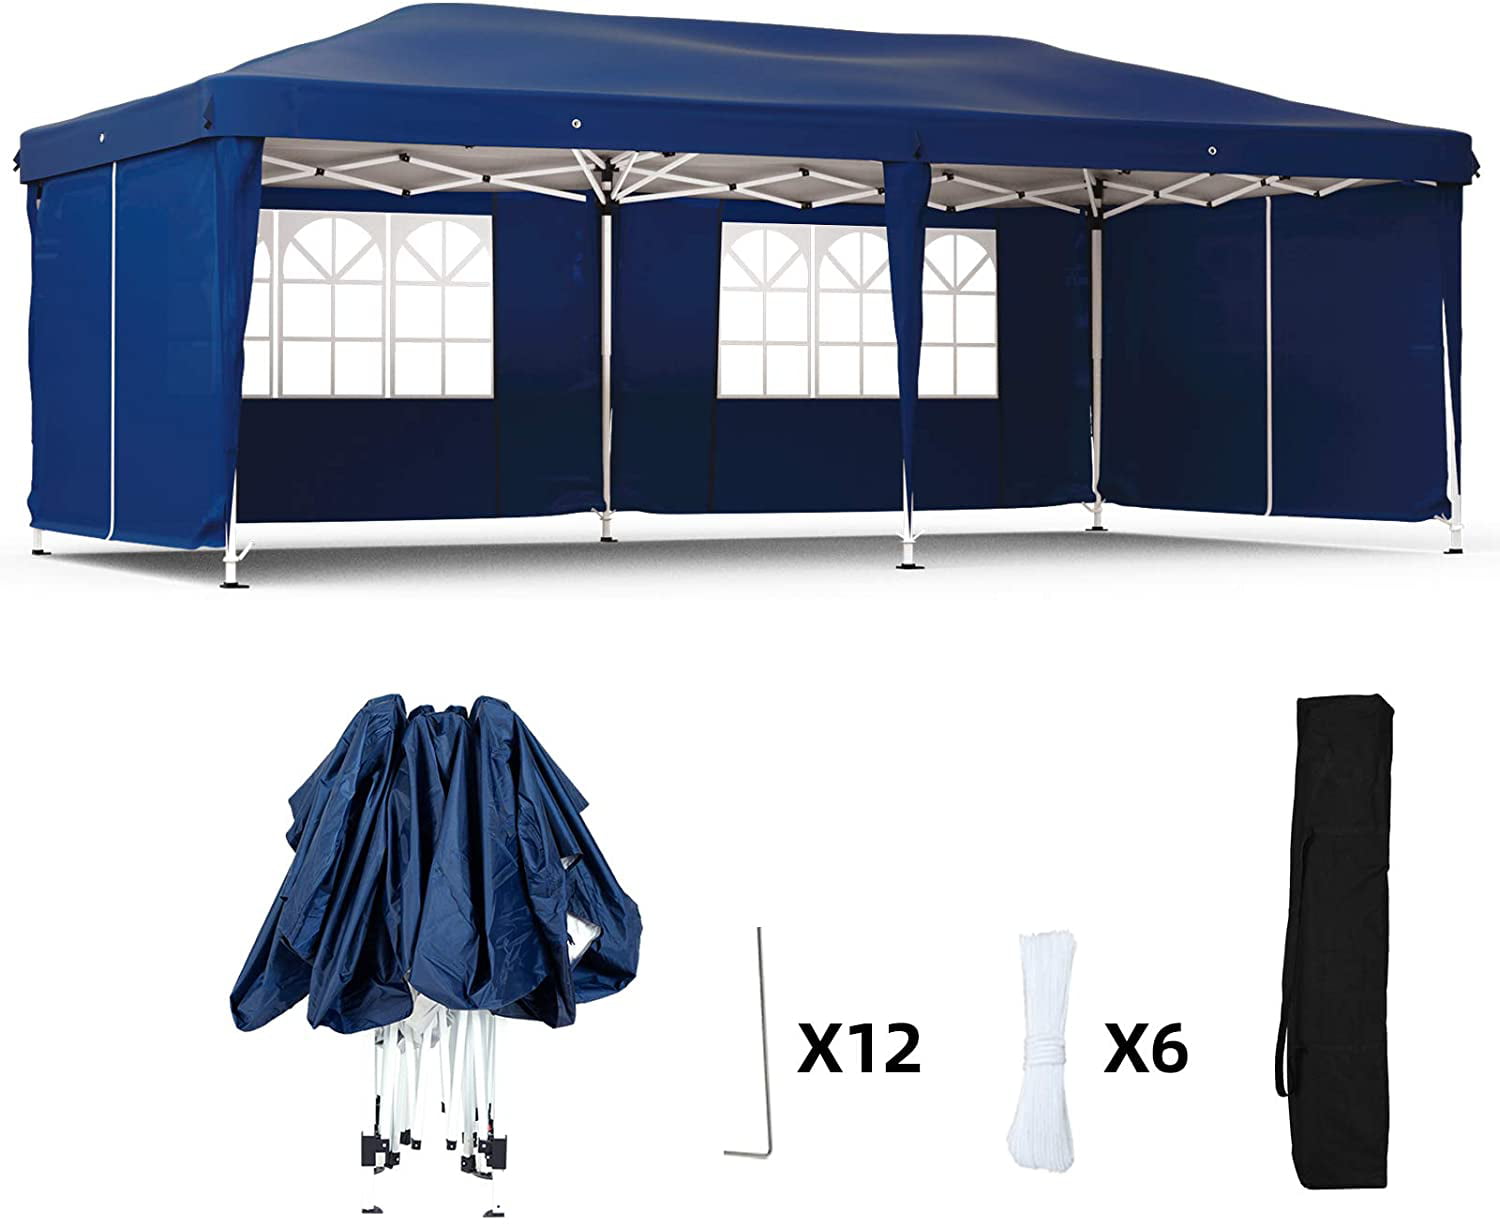 Mecor Outdoor Pop Up Canopy Tent Waterproof Gazebo with Removable Sidewalls Height Adjustable Tent for Party,Wedding(10’x20’,6 sidewalls)